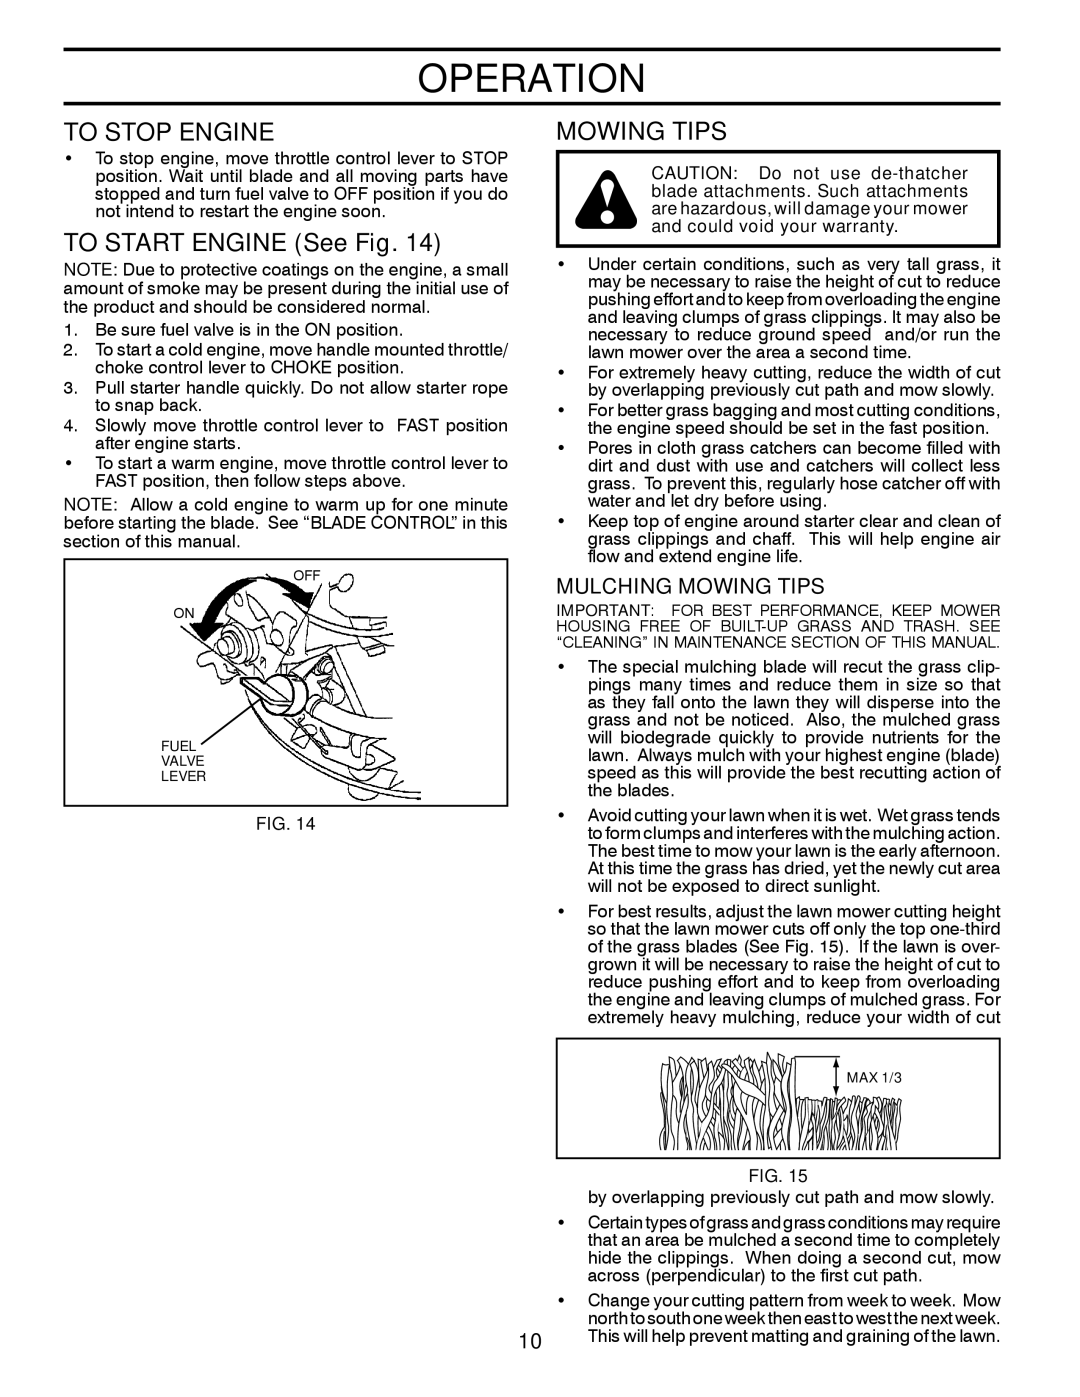 Husqvarna 7021RB owner manual To Stop Engine, TO START ENGINE See Fig, Mulching Mowing Tips, Operation 